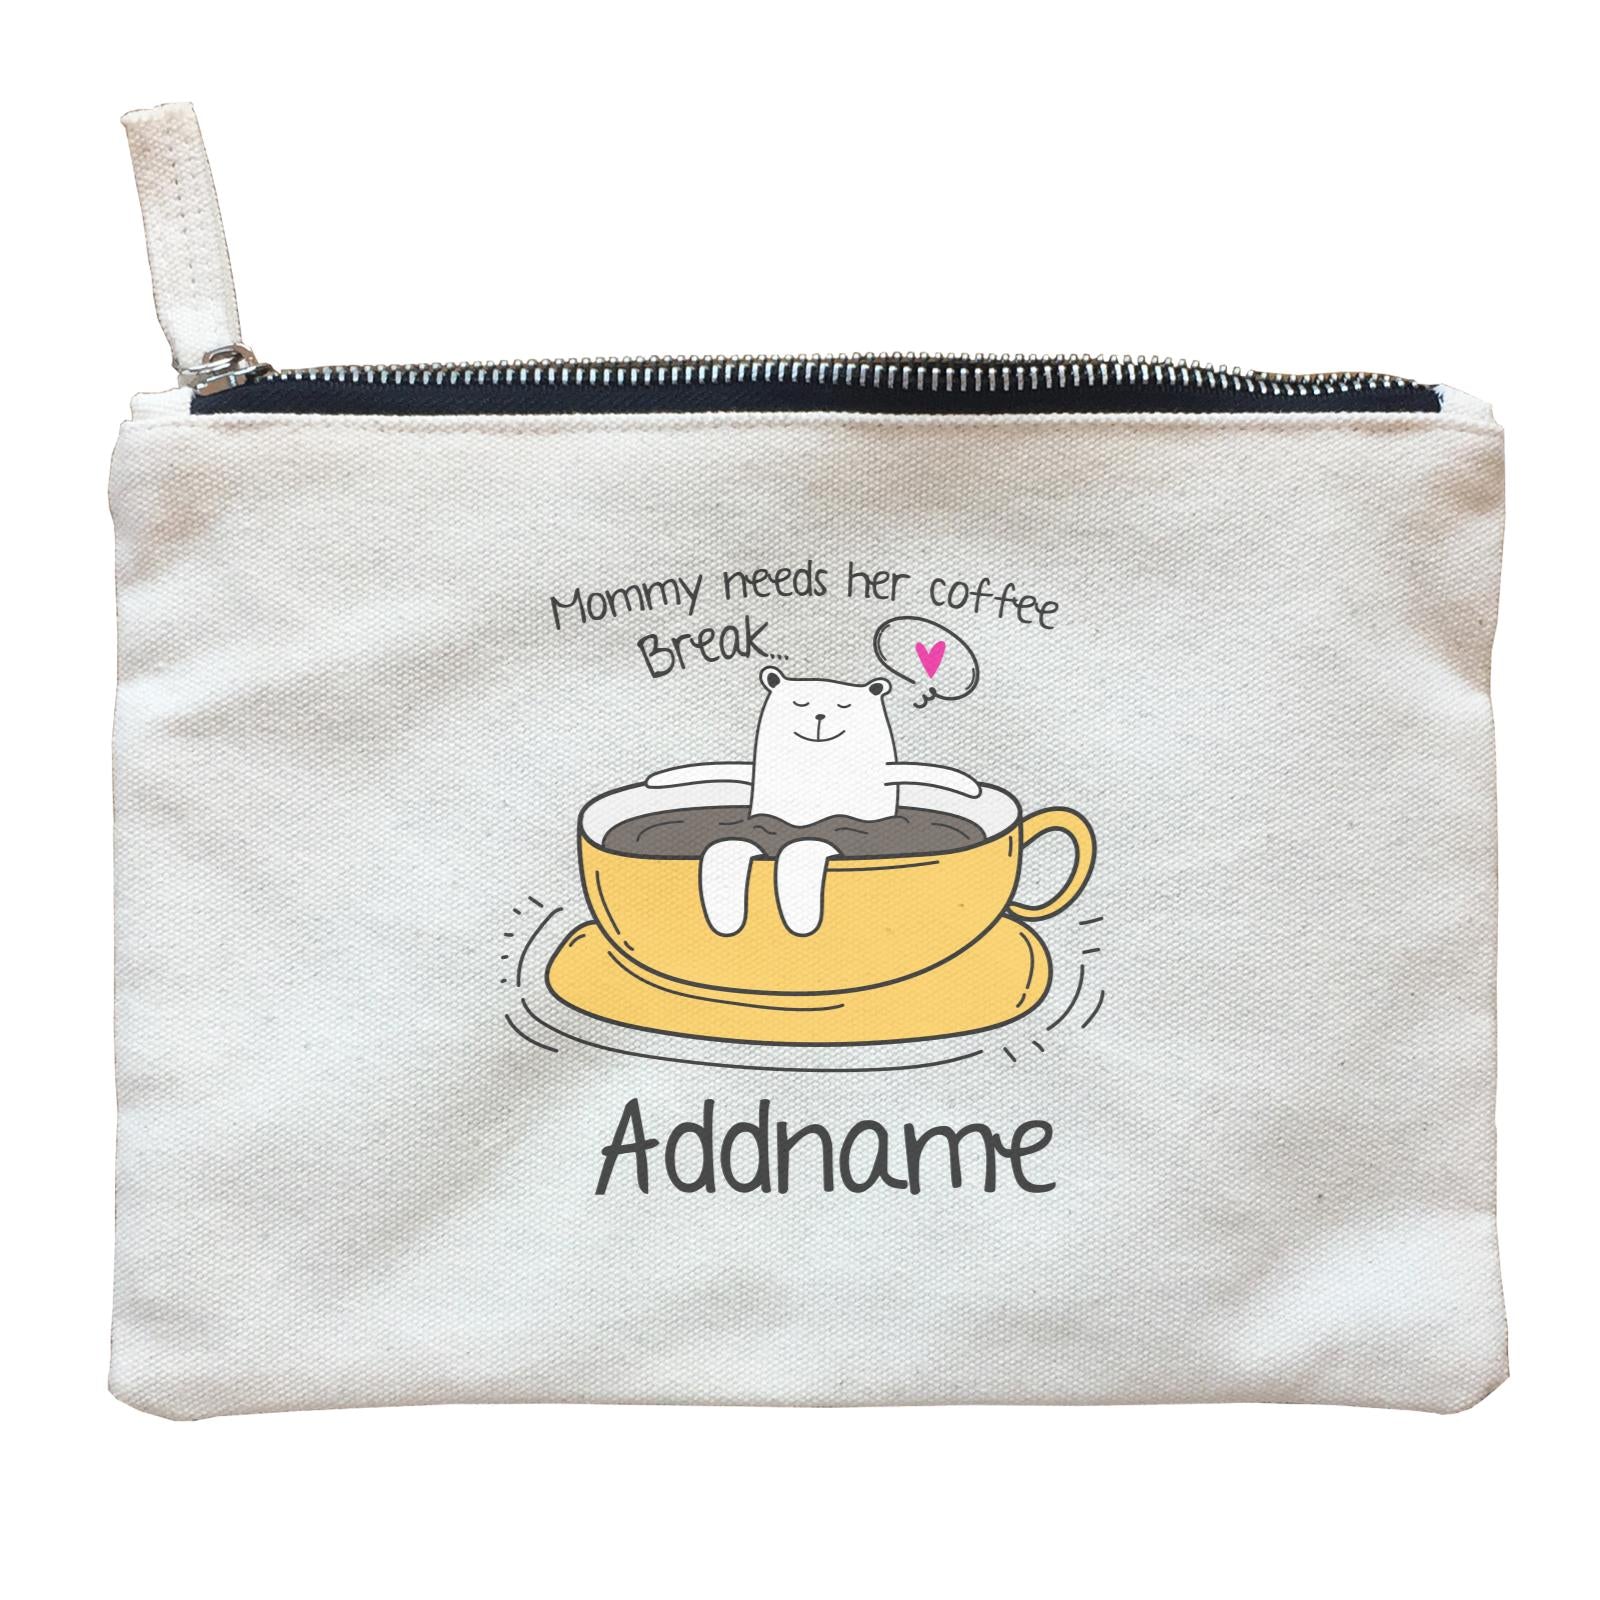 Cute Animals And Friends Series Mommy Needs Her Coffee Break Bear Addname Zipper Pouch